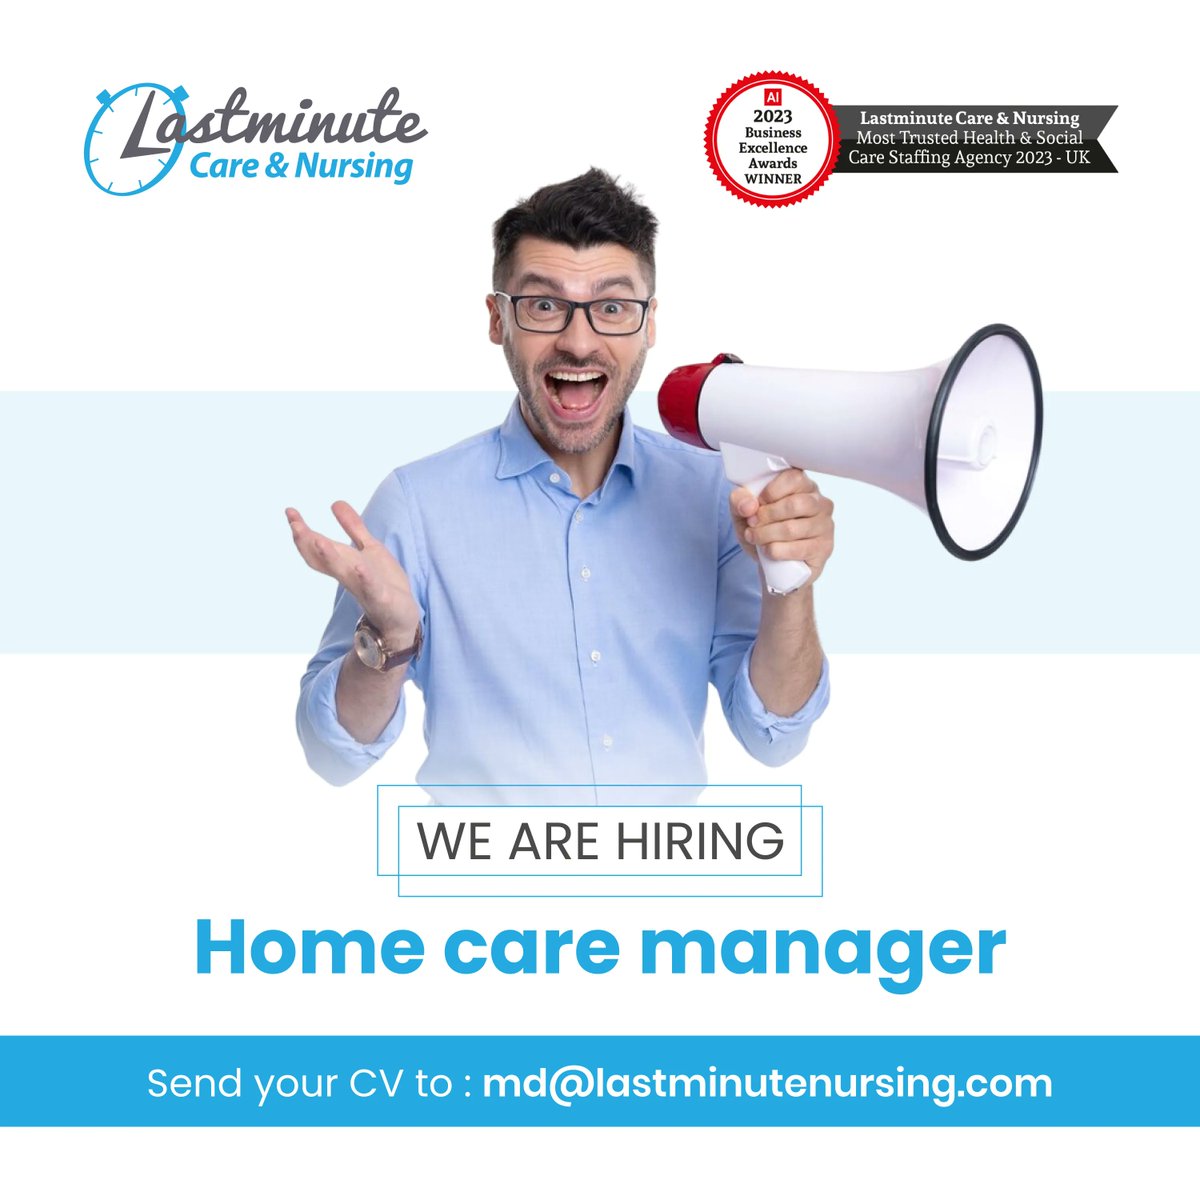 Be the leader your future deserves! Lastminute Care & Nursing is on the lookout for a Home Care Manager to join their growing team and help build a better tomorrow. 
#homecare #homecareagency #homecareprovider #homecareuk #homecareservice #homecareservices #caremanager #ukjobs